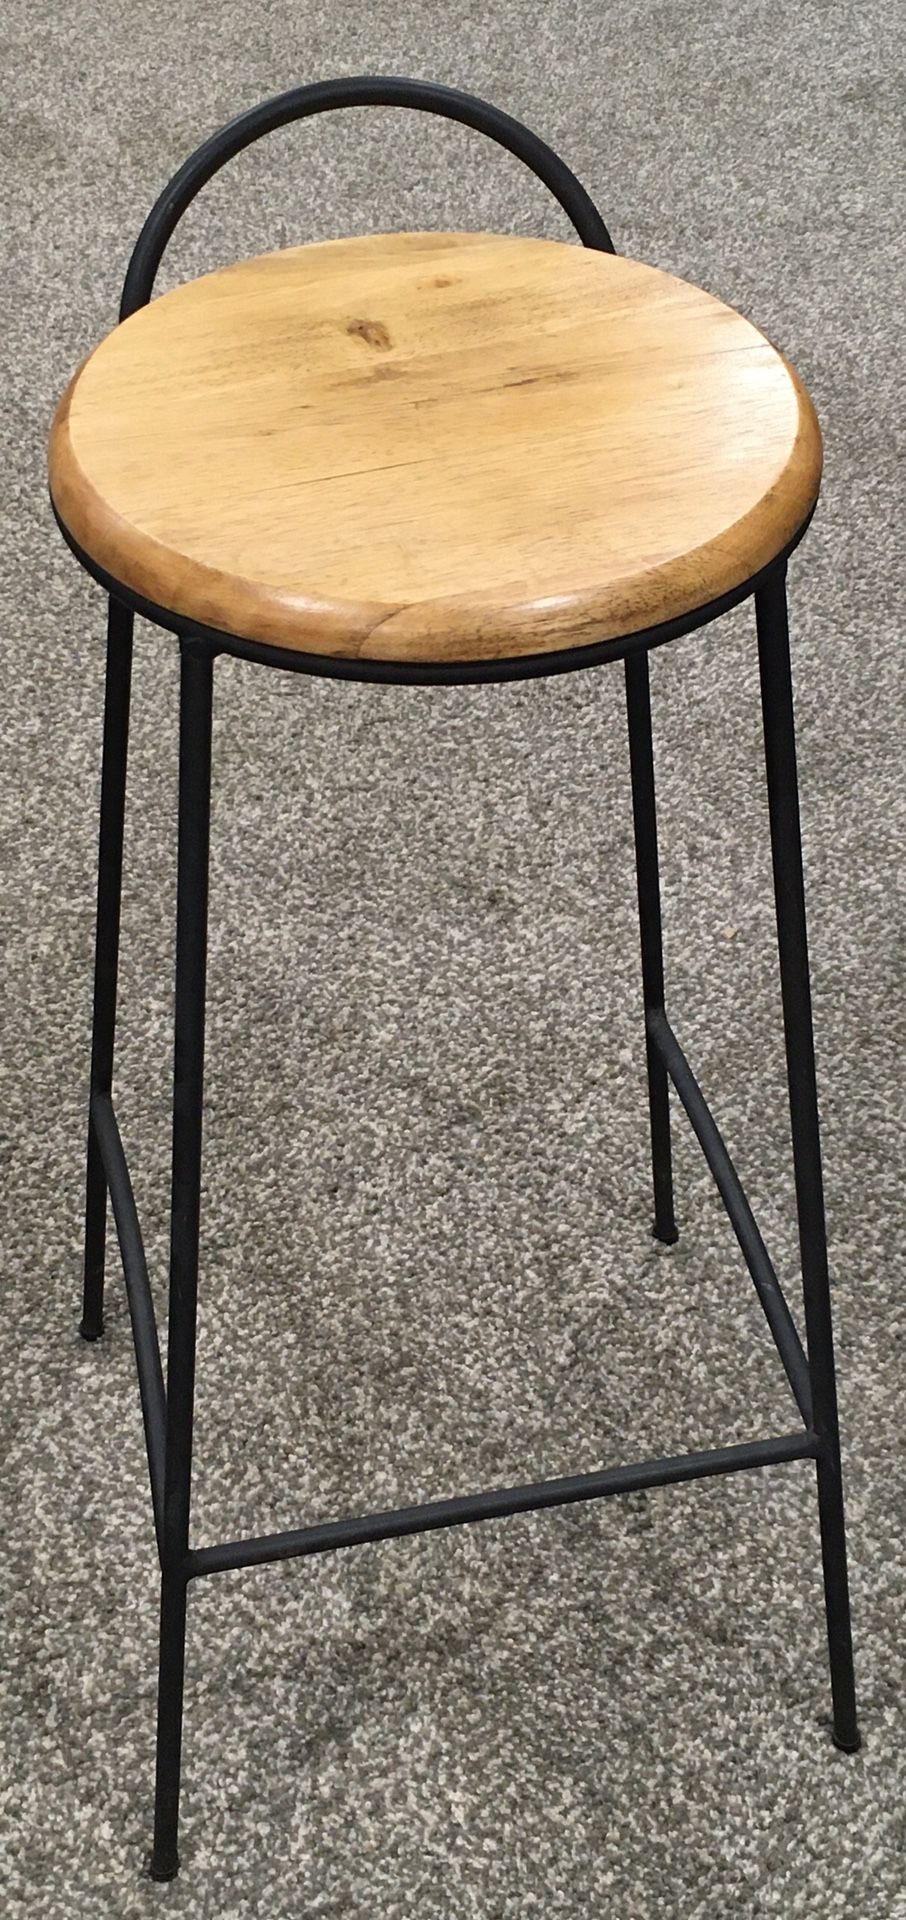 Black Iron Stool with Round Wood Top